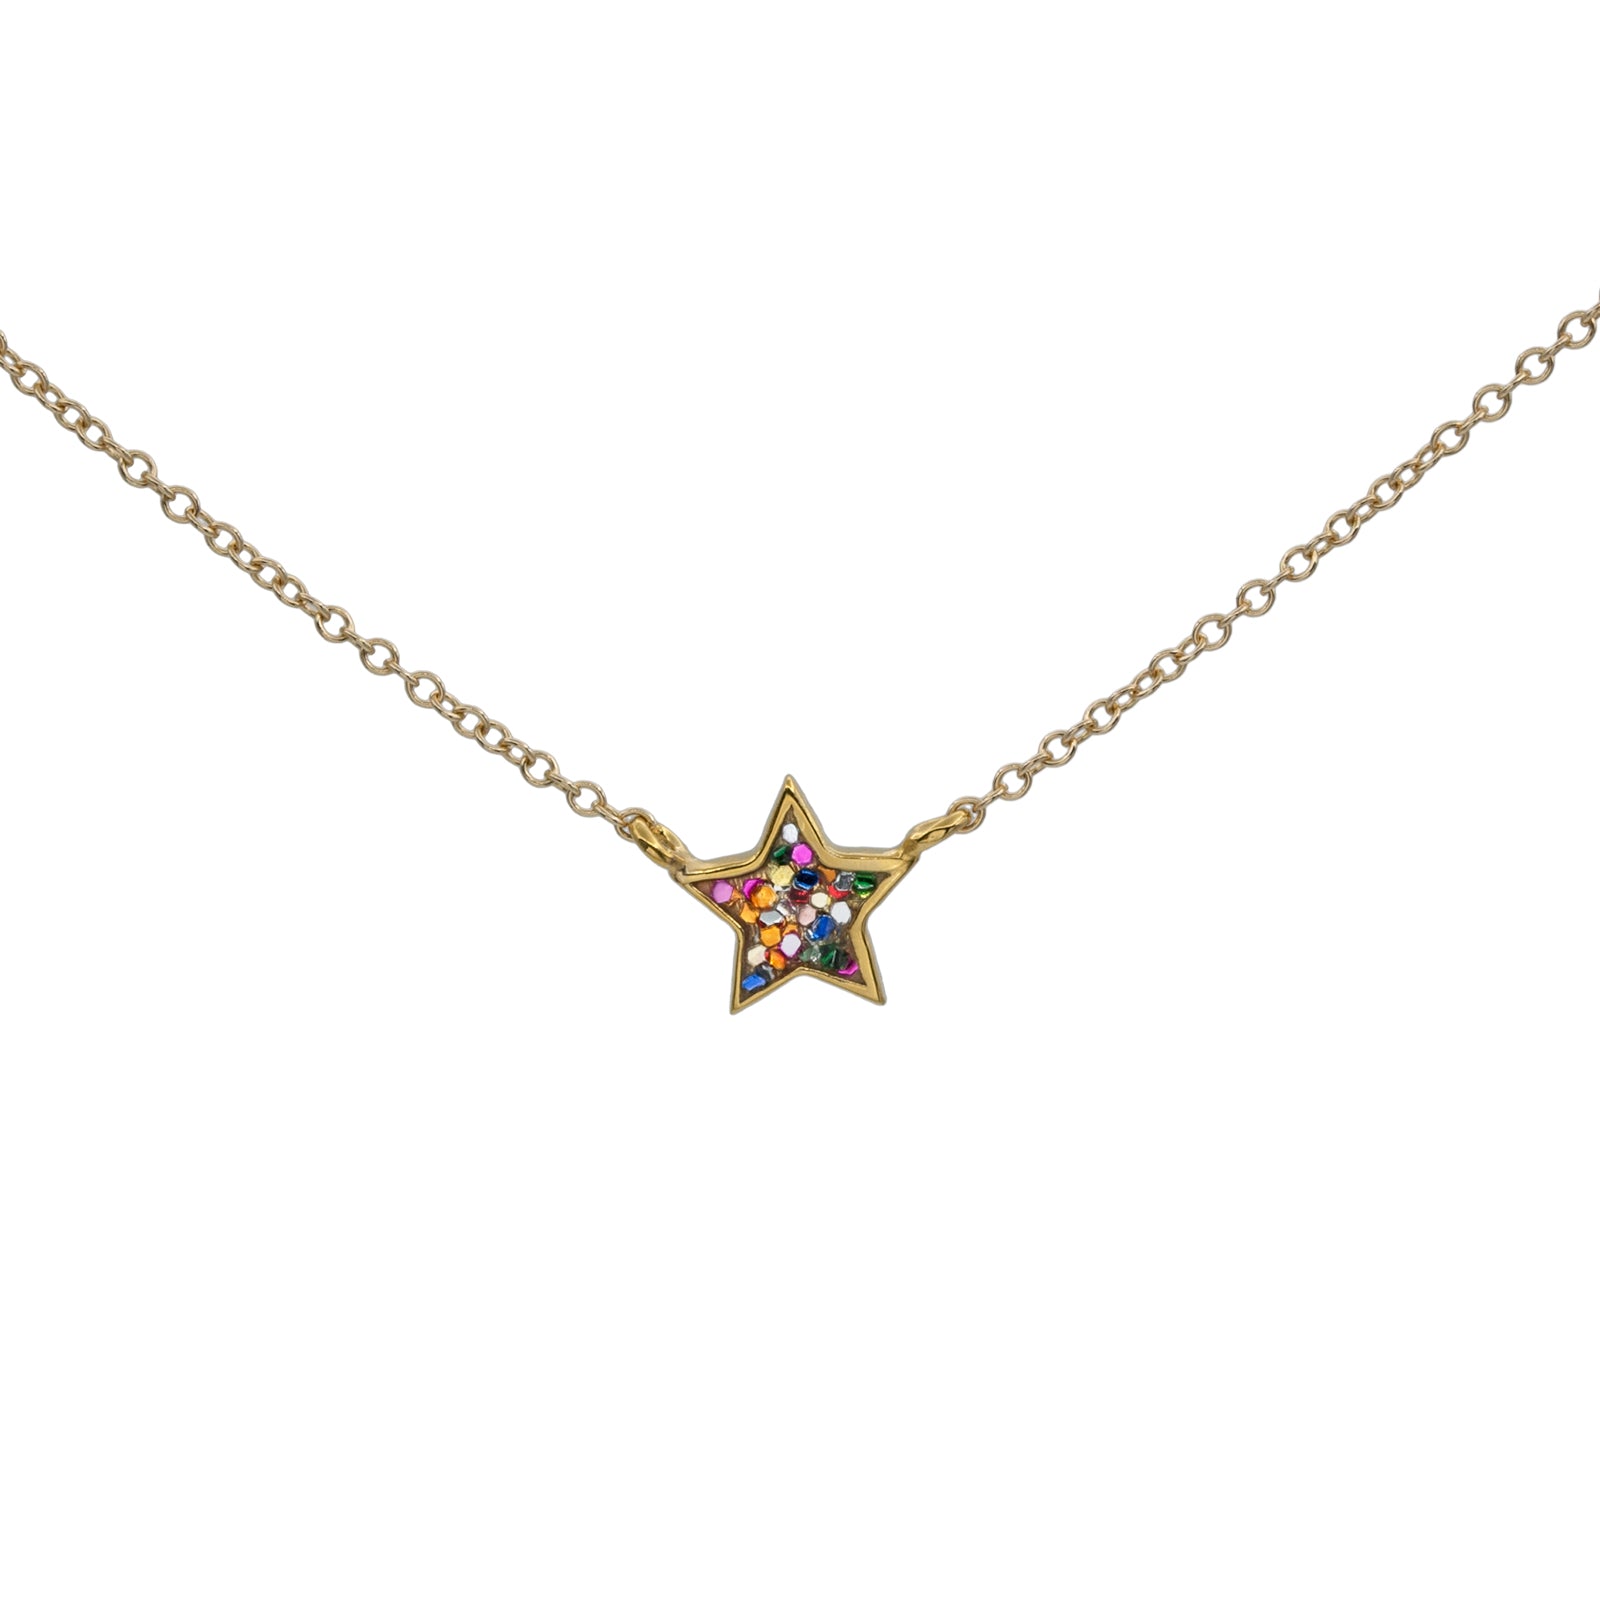 Star necklace gold and multiglitter